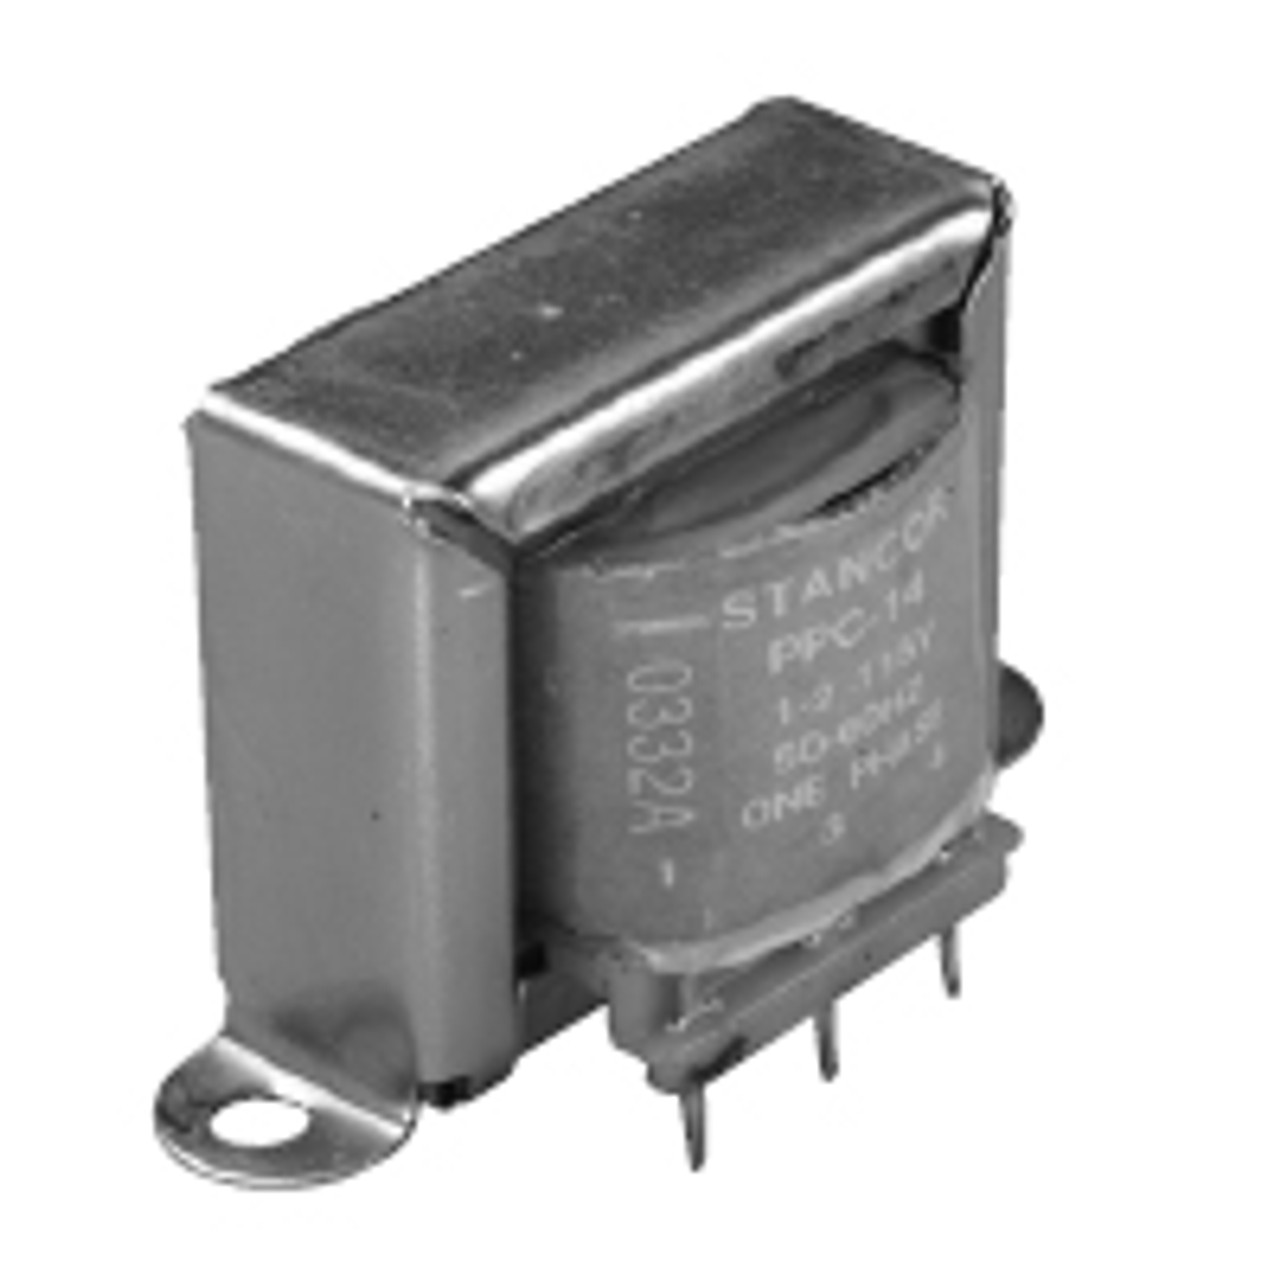 Stancor / White Rodgers PPC-17 Printed Circuit Transformers